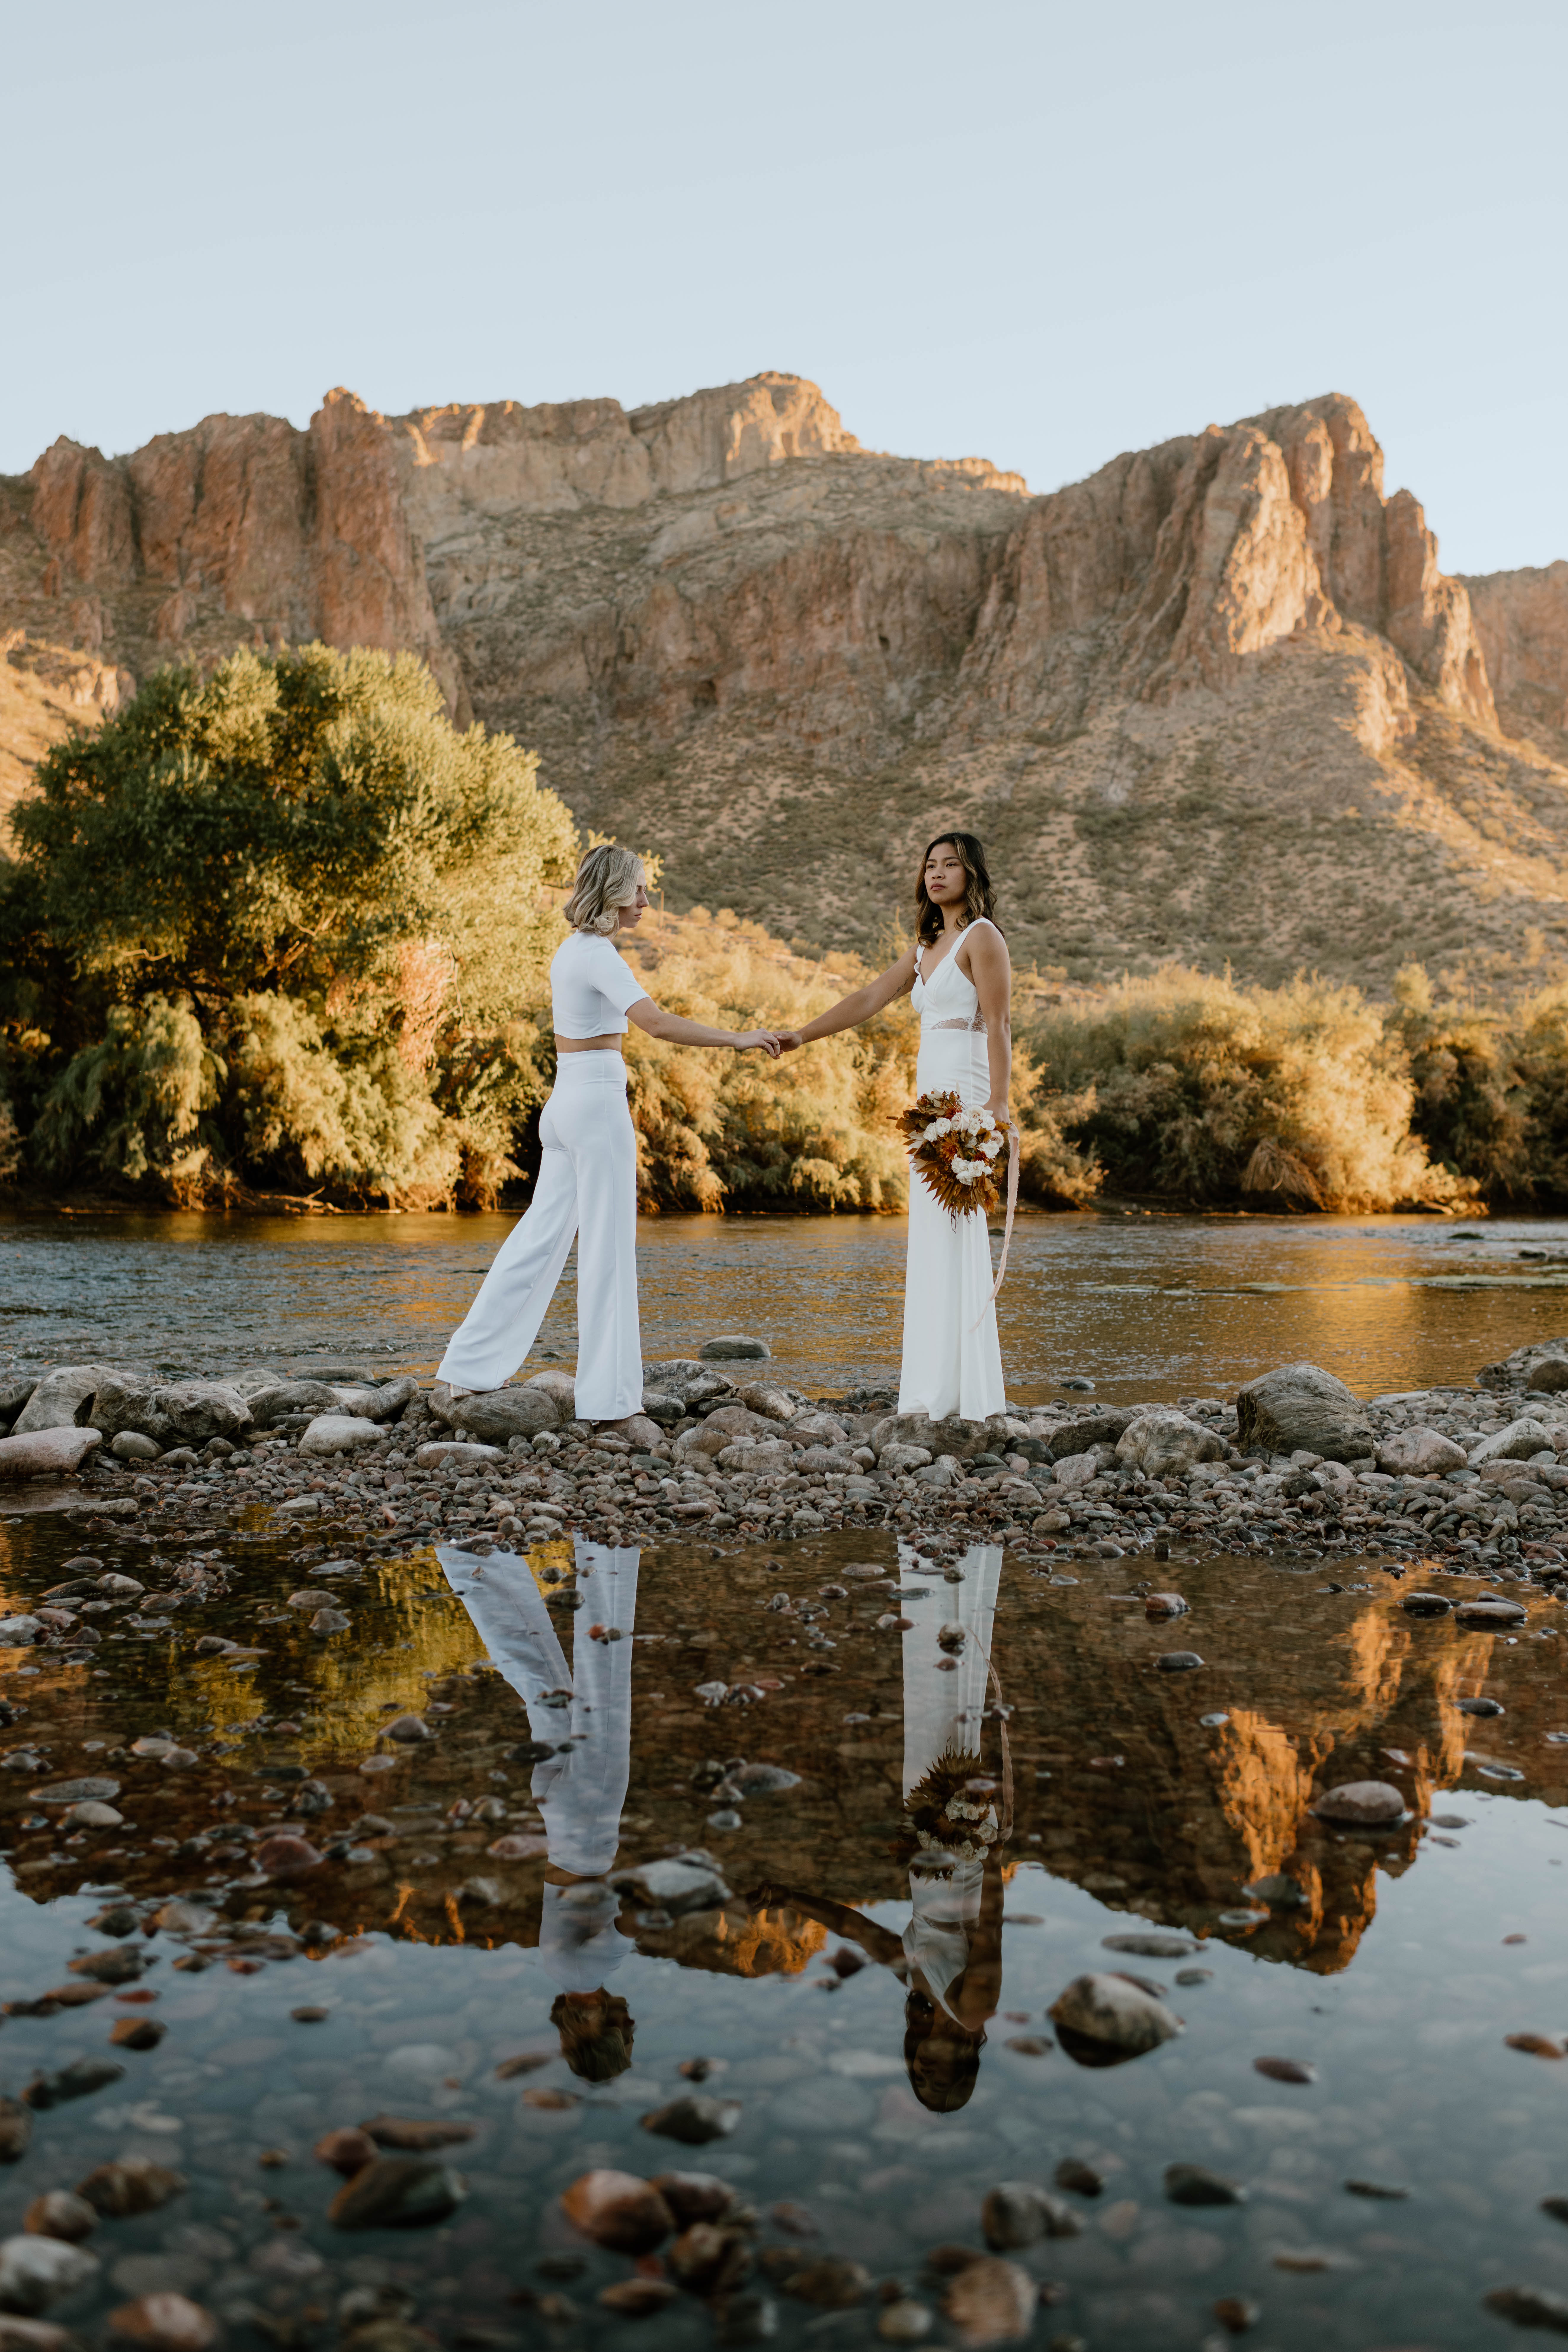 Two brides stand on a rocky water's edge in a desert in Arizona for their wedding